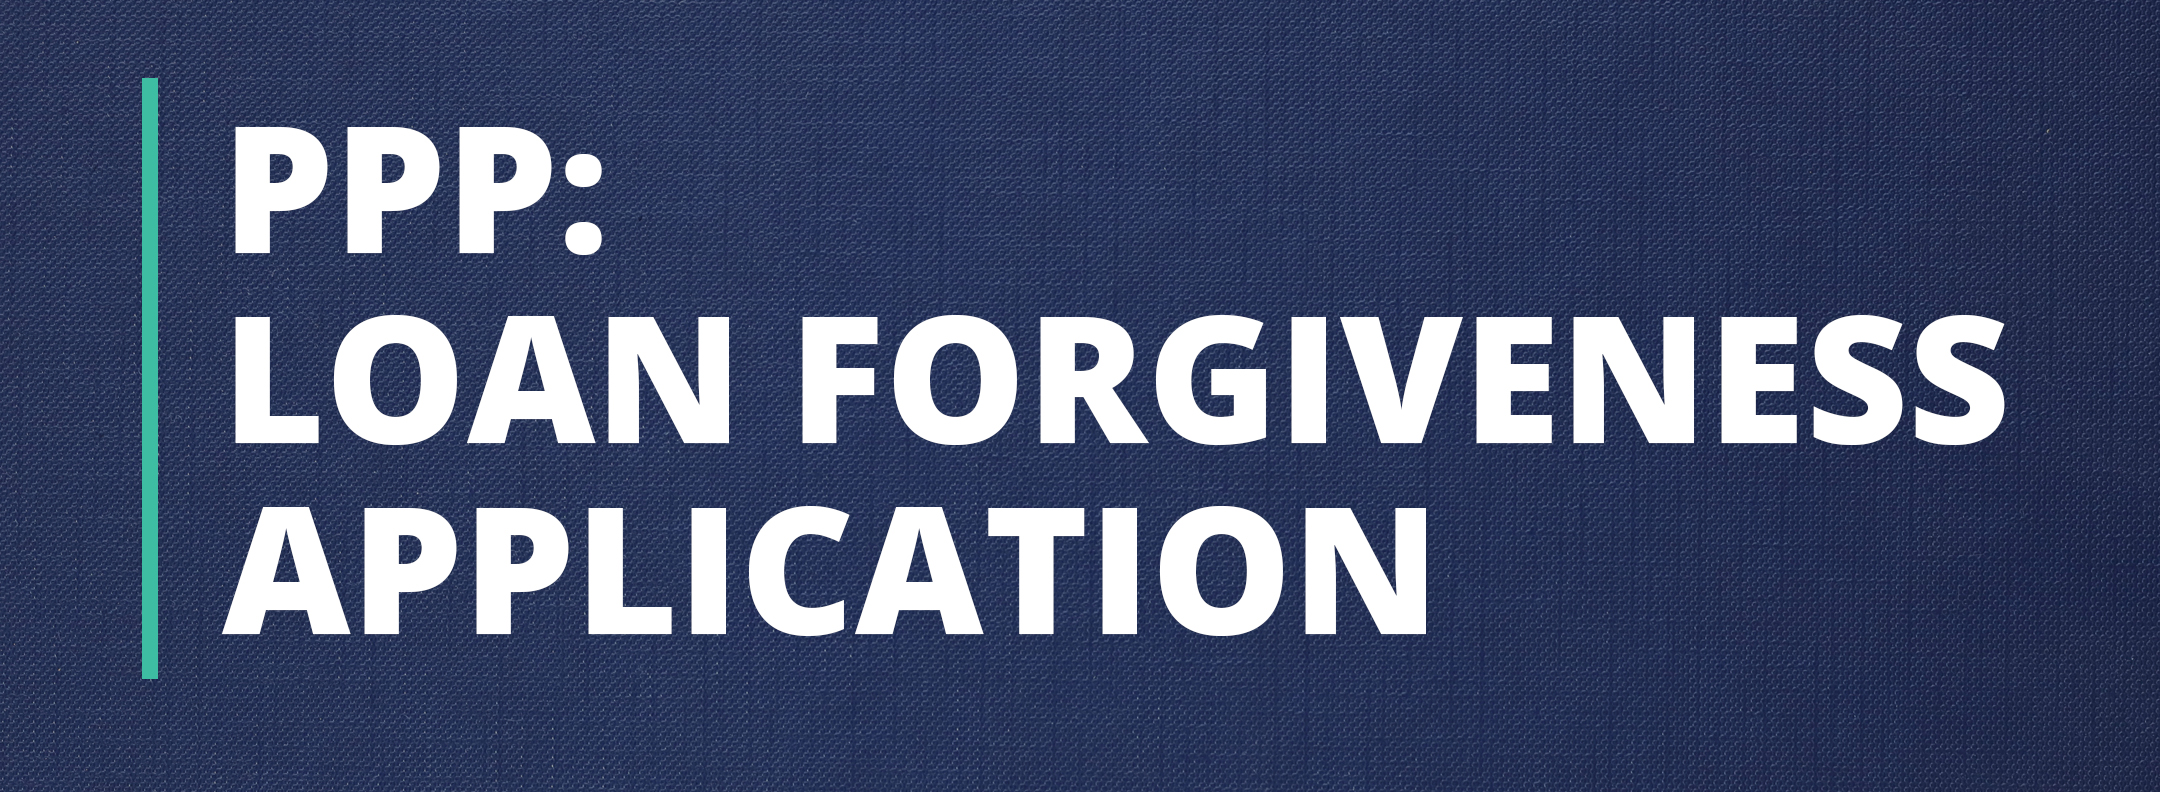 The SBA releases PPP Loan Forgiveness Application